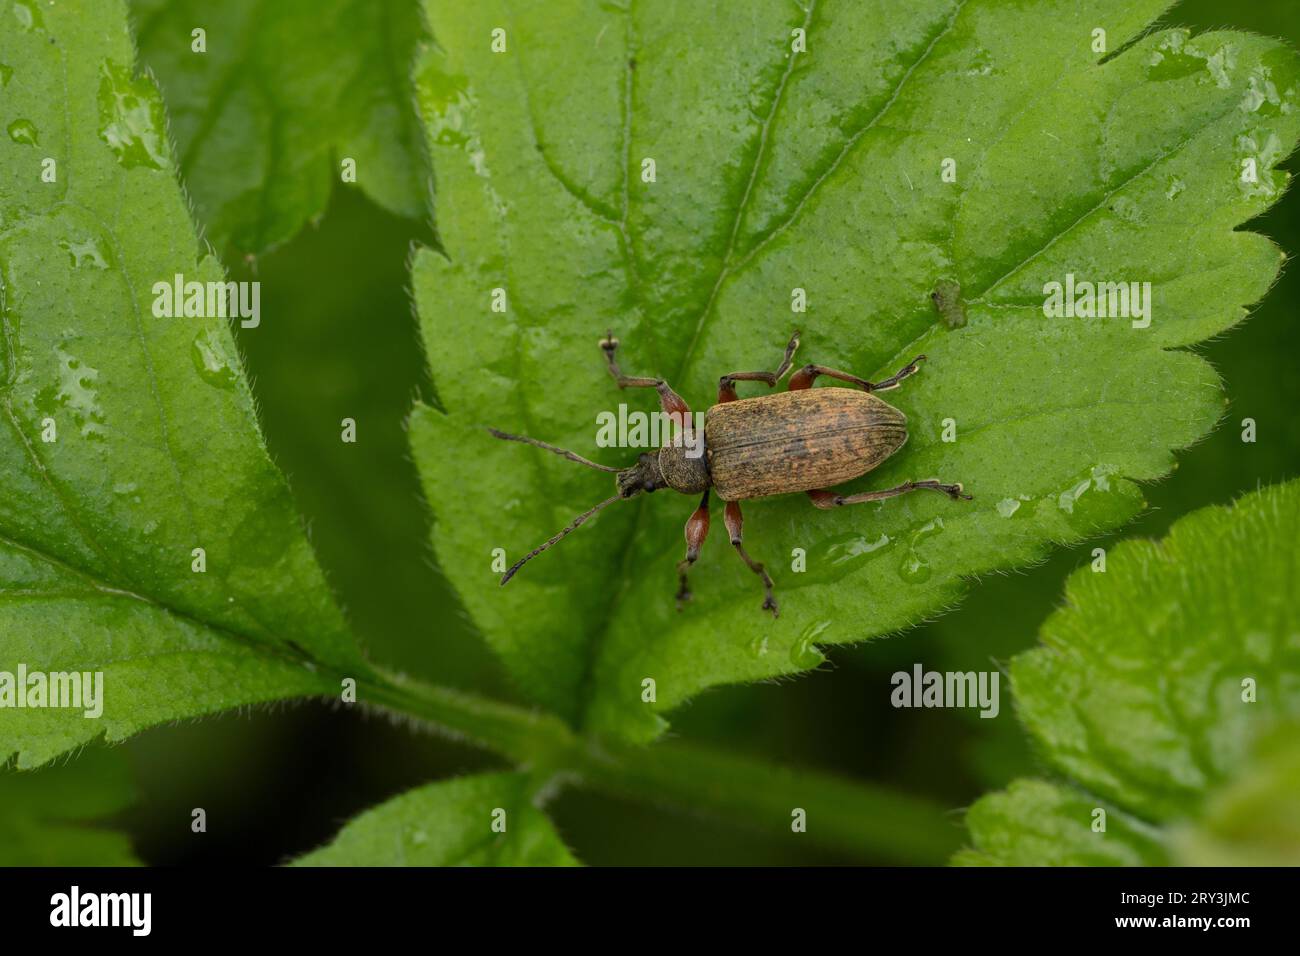 Phyllobius glaucus Family Curculionidae Genus Phyllobius Weevil beetle wild nature insect photography, picture, wallpaper Stock Photo